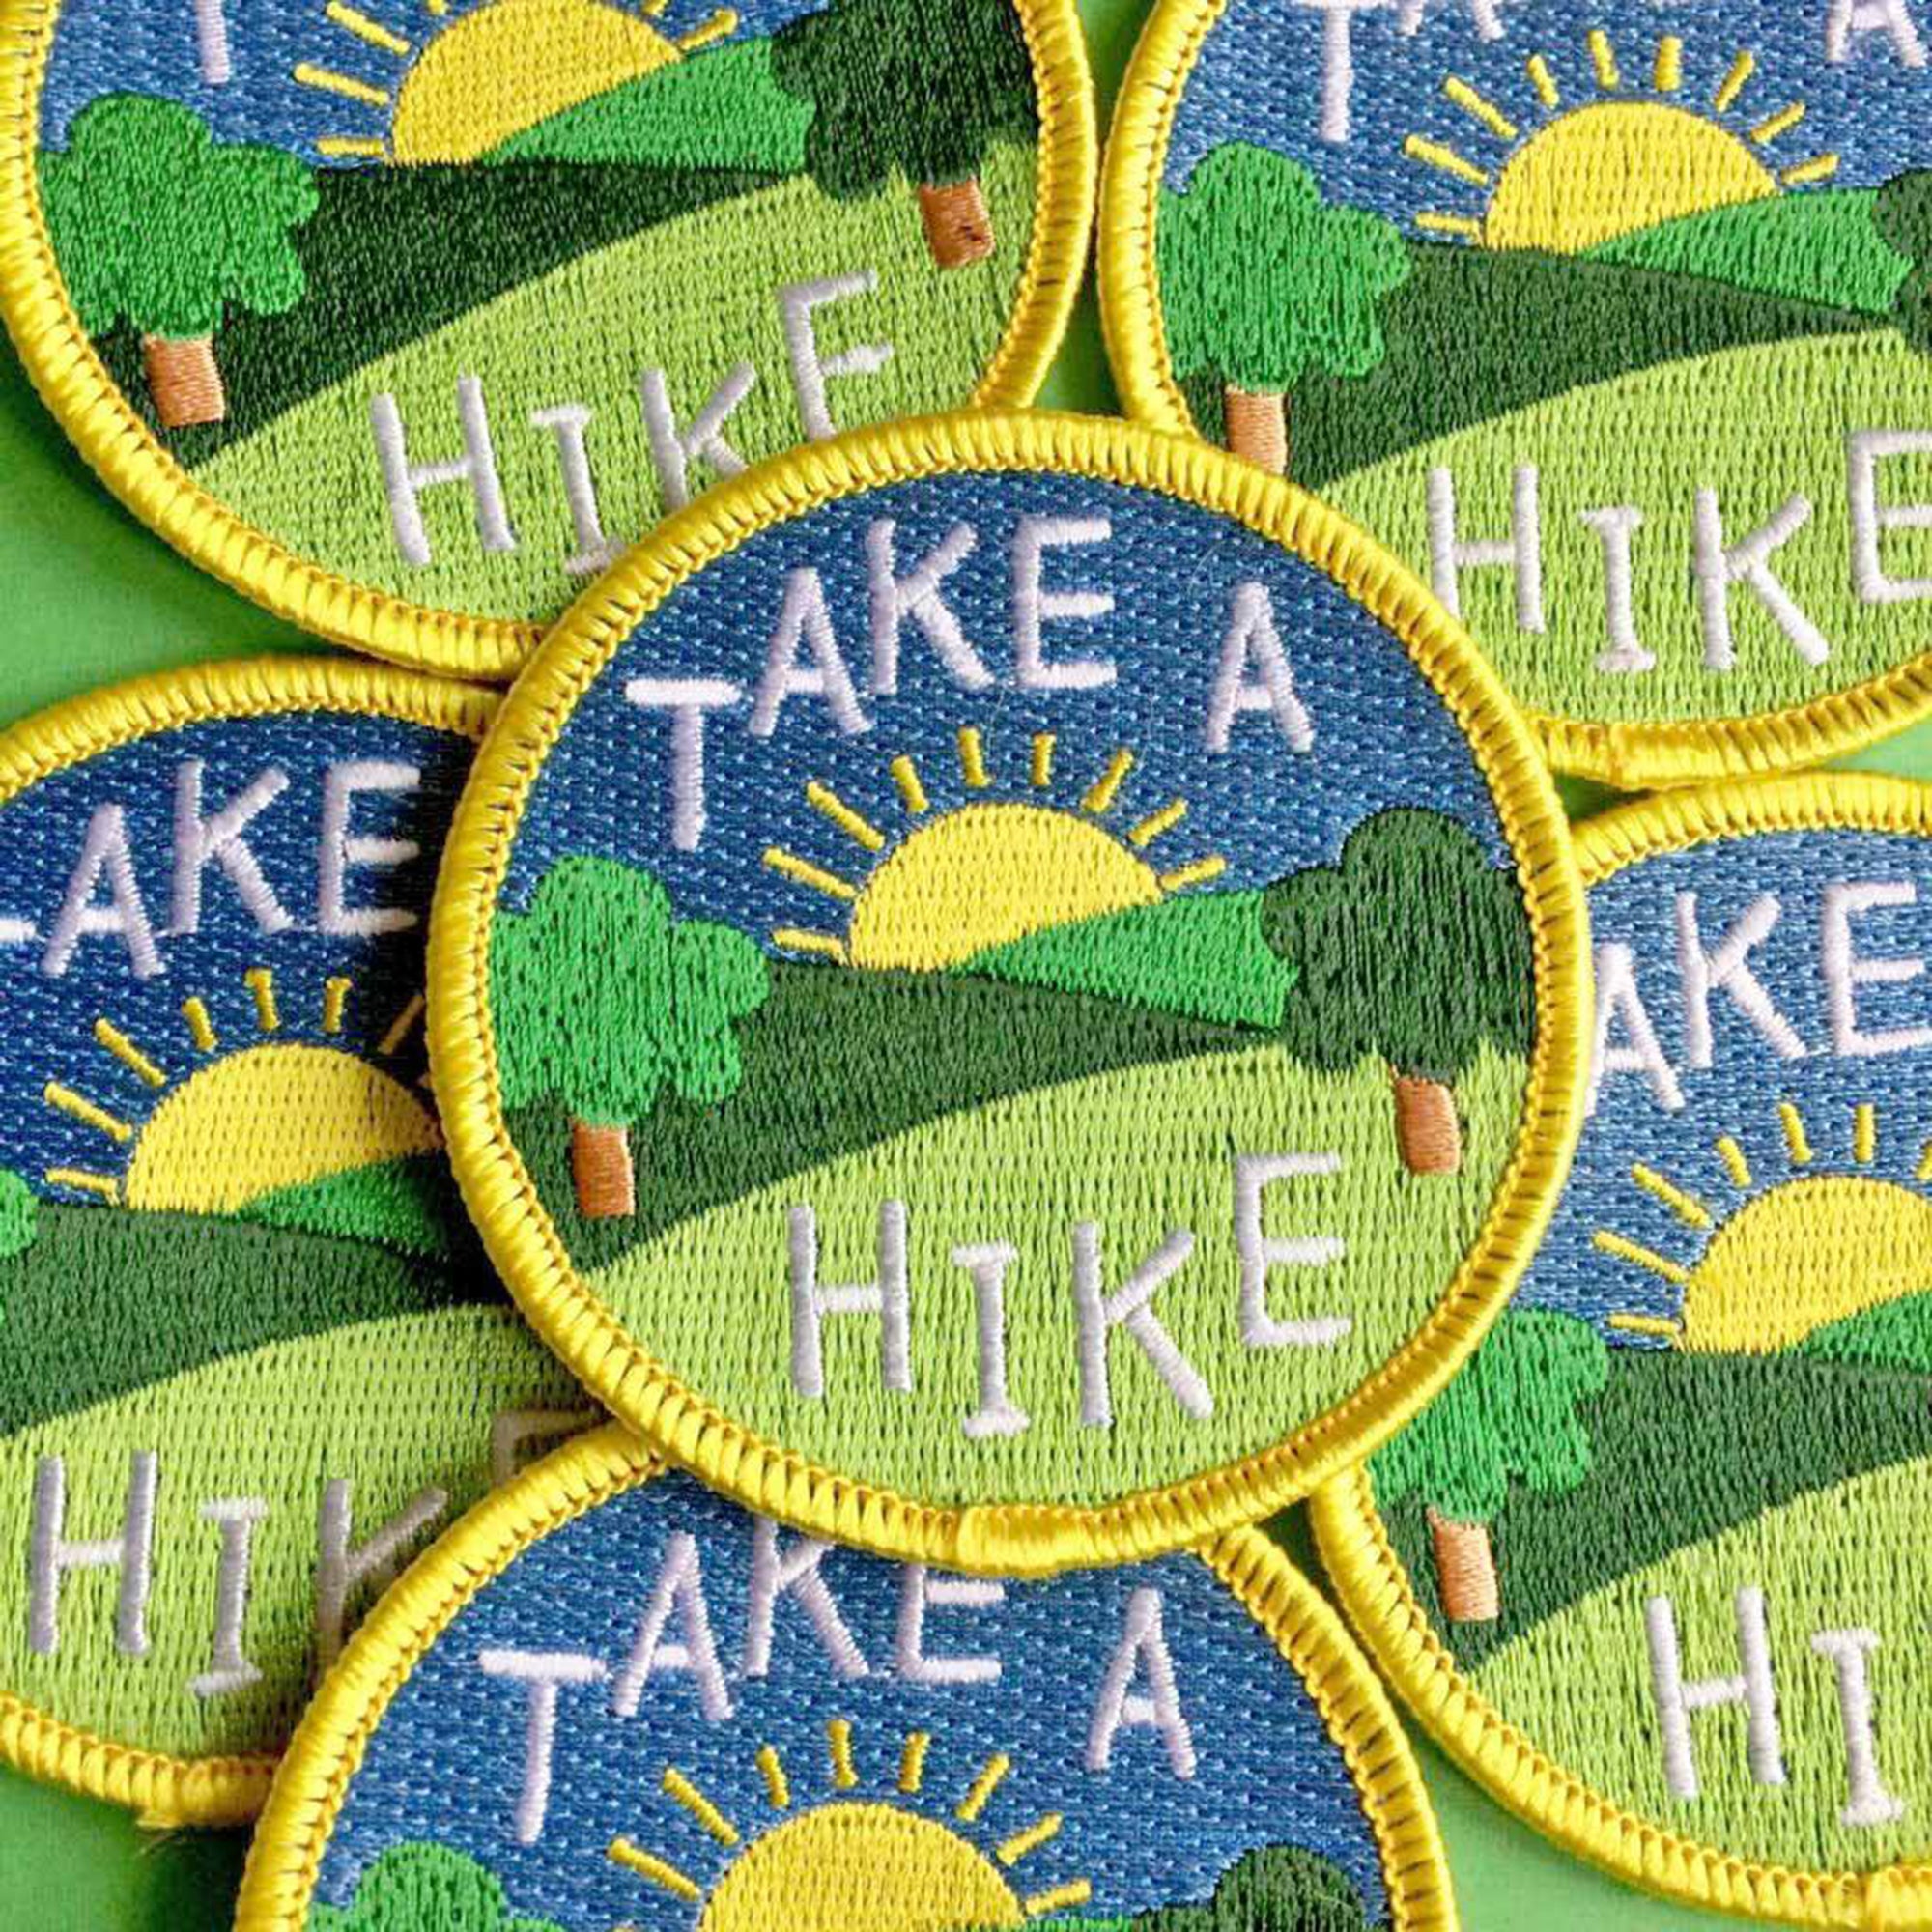 Take a Hike patch - Inspired 